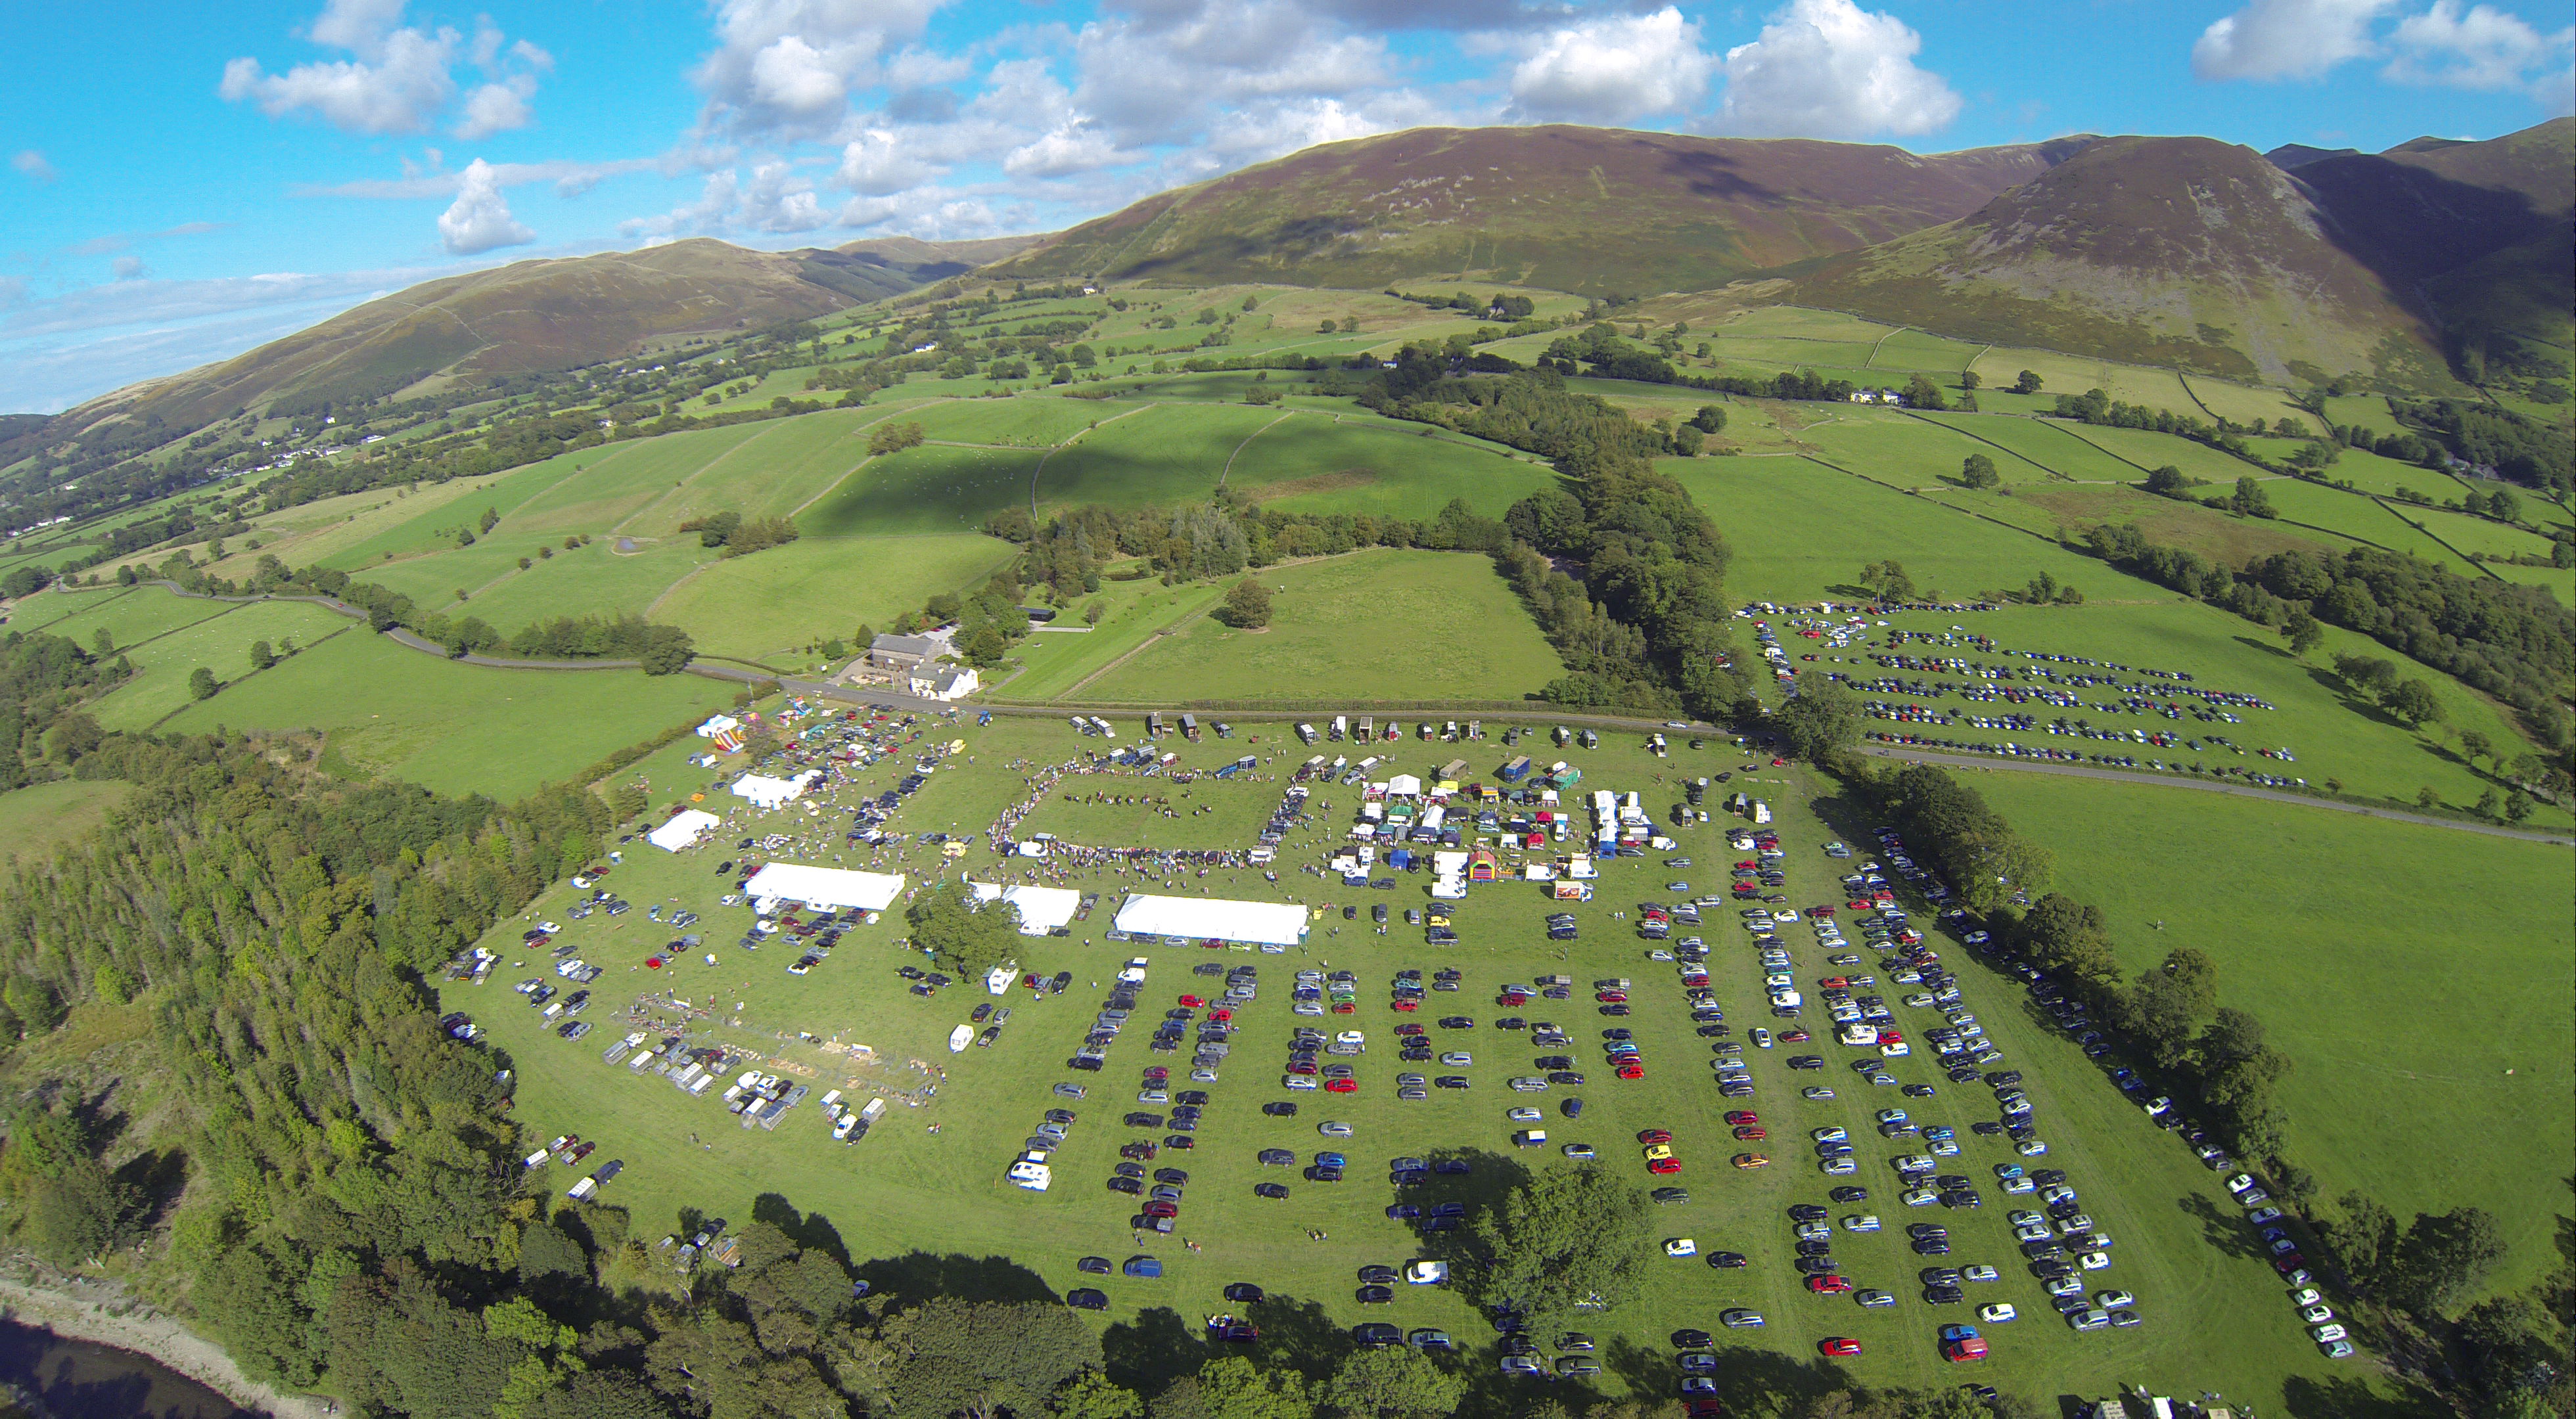 A big thank you to everyone who took part, helped and enjoyed Loweswater Show on Sunday